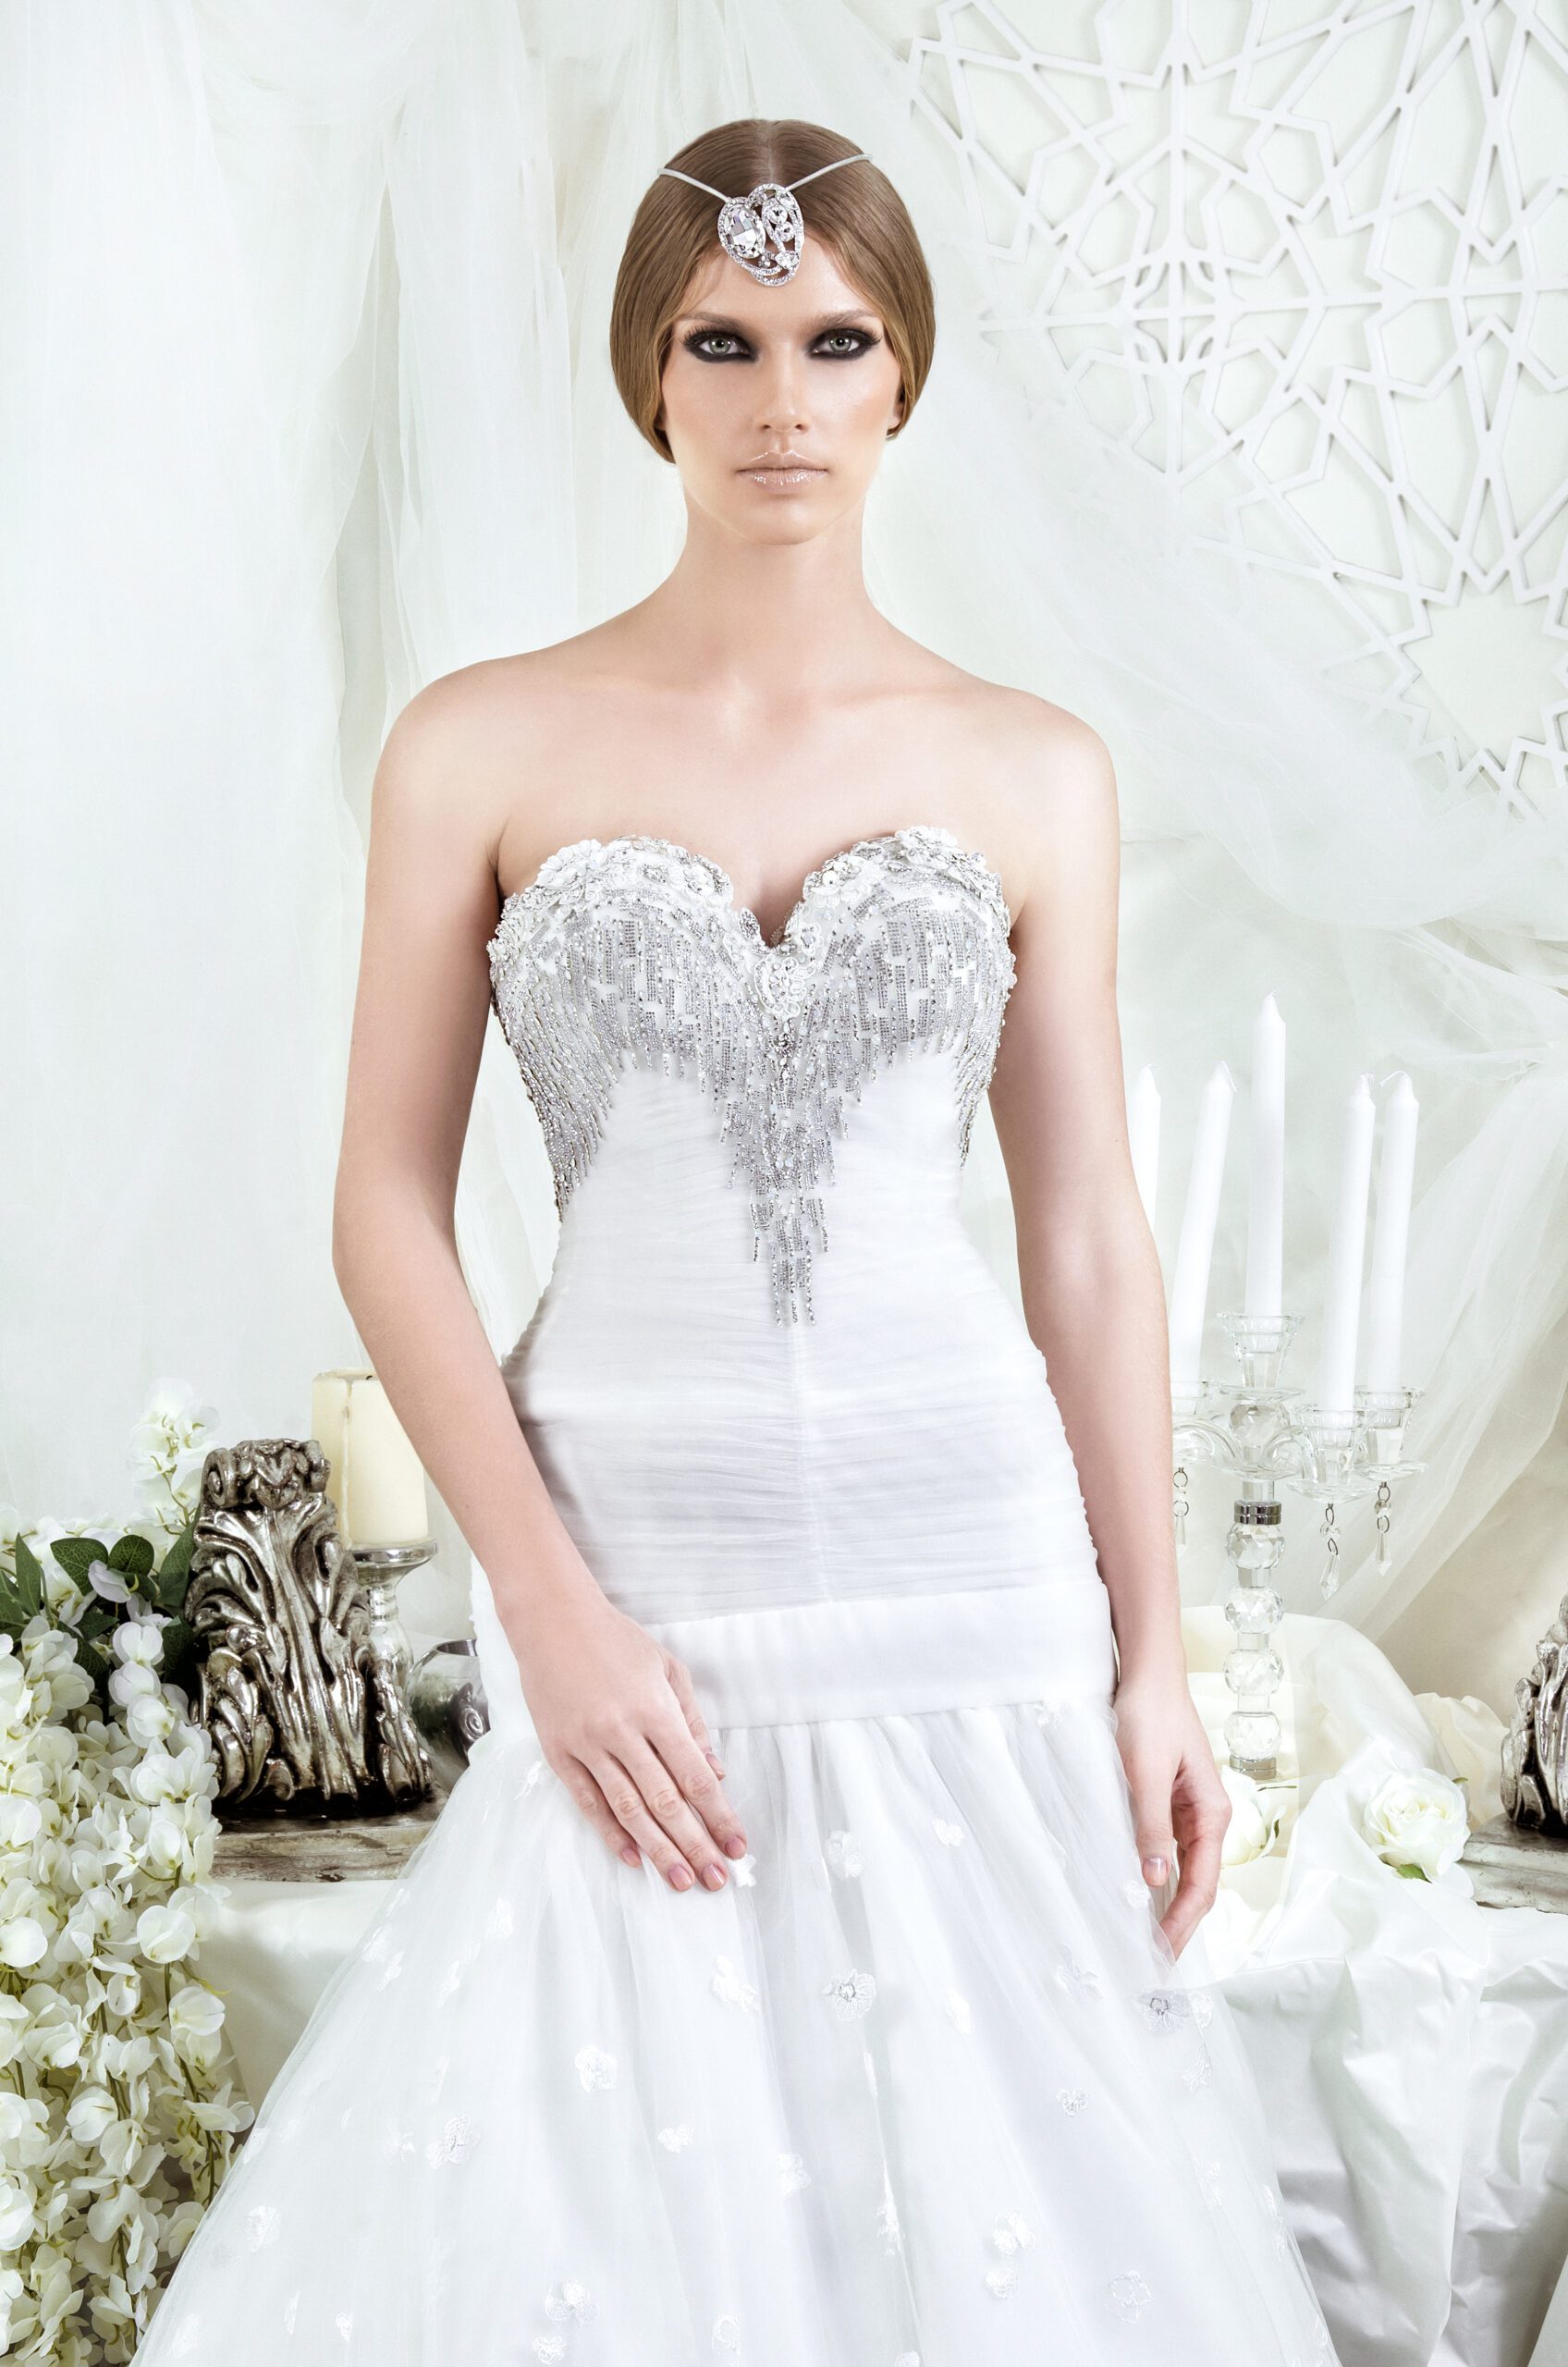 fashion atelier by darsara 9 1 scaled Stunning bridal and wedding dresses available for rental in Dubai, UAE